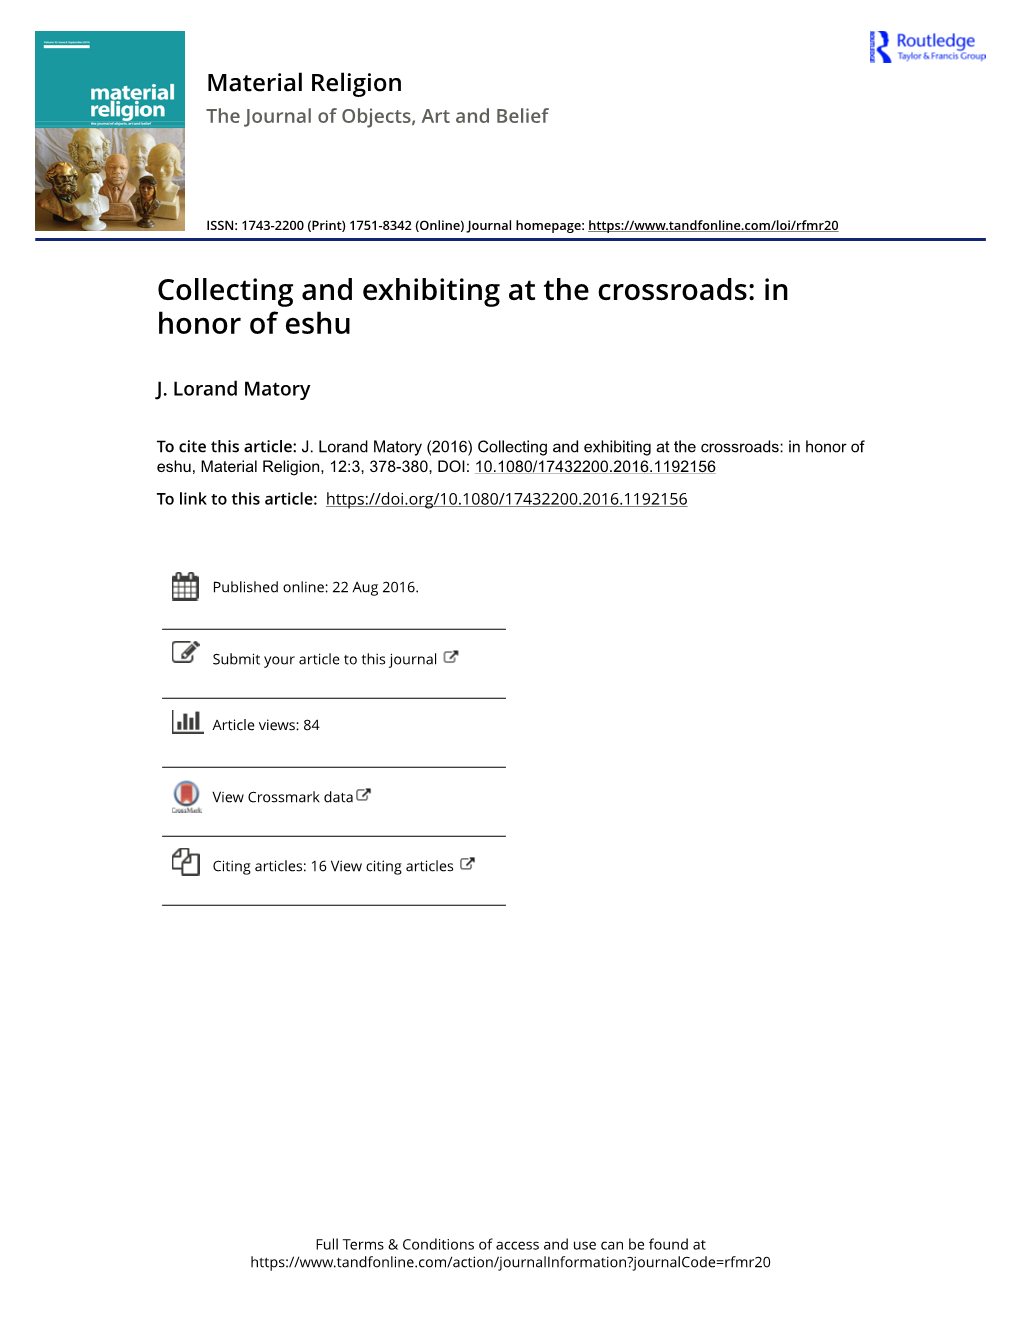 Collecting and Exhibiting at the Crossroads: in Honor of Eshu